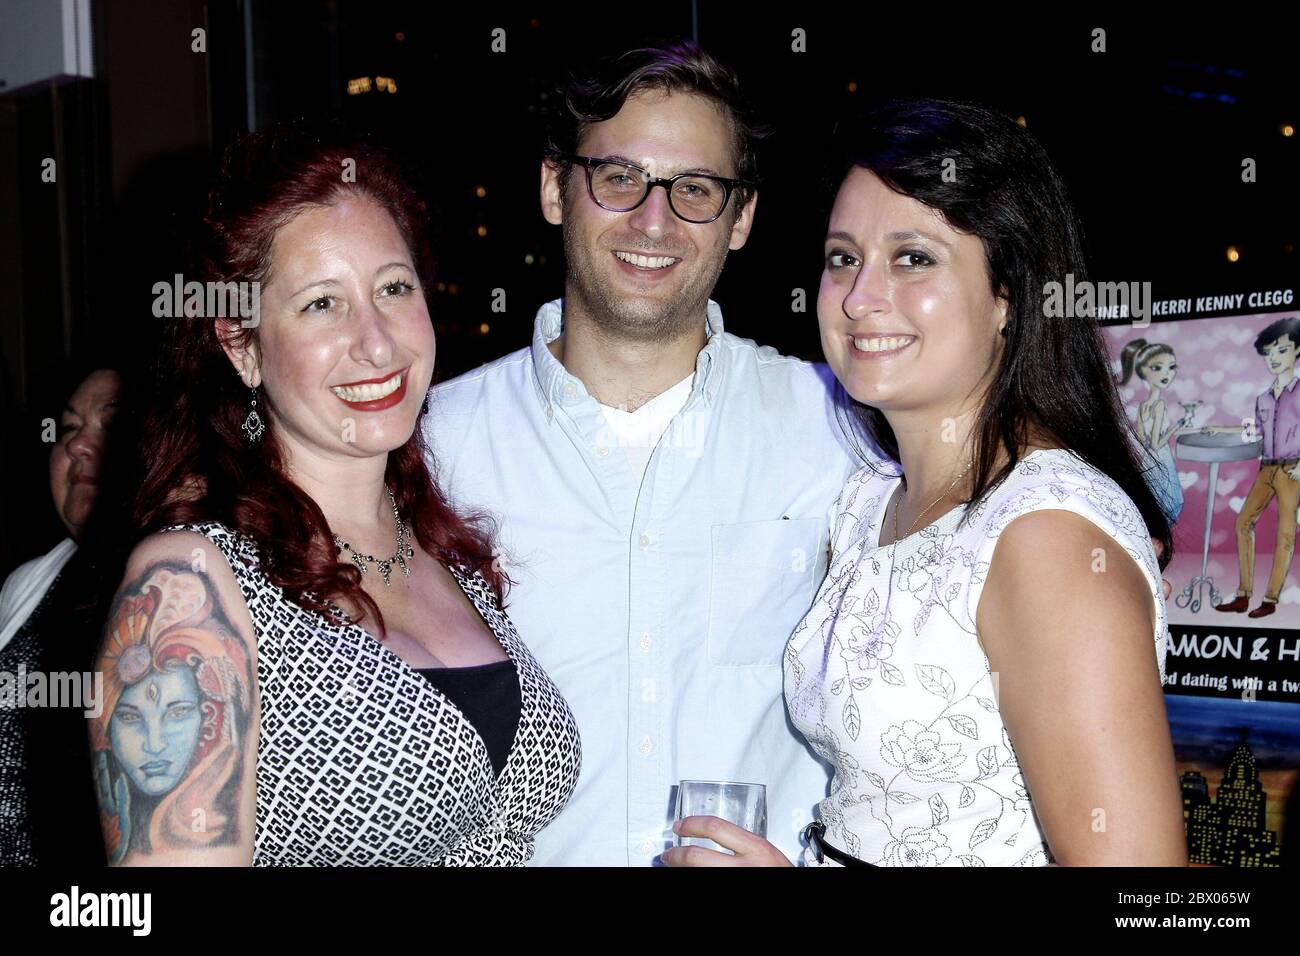 New York, NY, USA. 30 July, 2015. Denise Latella, Bobby Weinberger, Christine Detter at the After Party To Celebrate The Completion And Screening Of The Short Film "Speed Damon & Holly" at Level R. Credit: Steve Mack/Alamy Stock Photo